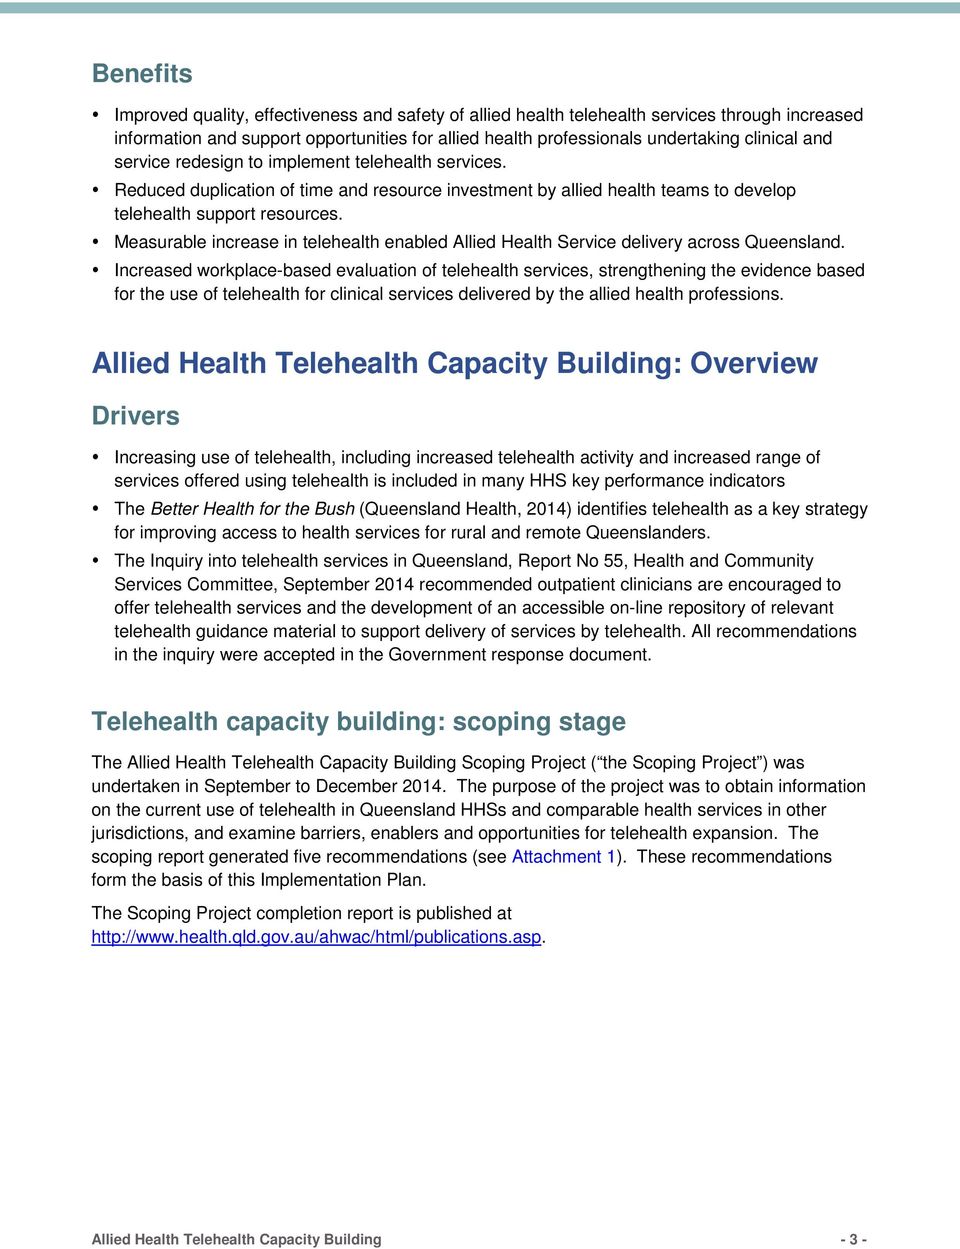 Measurable increase in telehealth enabled Allied Health Service delivery across Queensland.